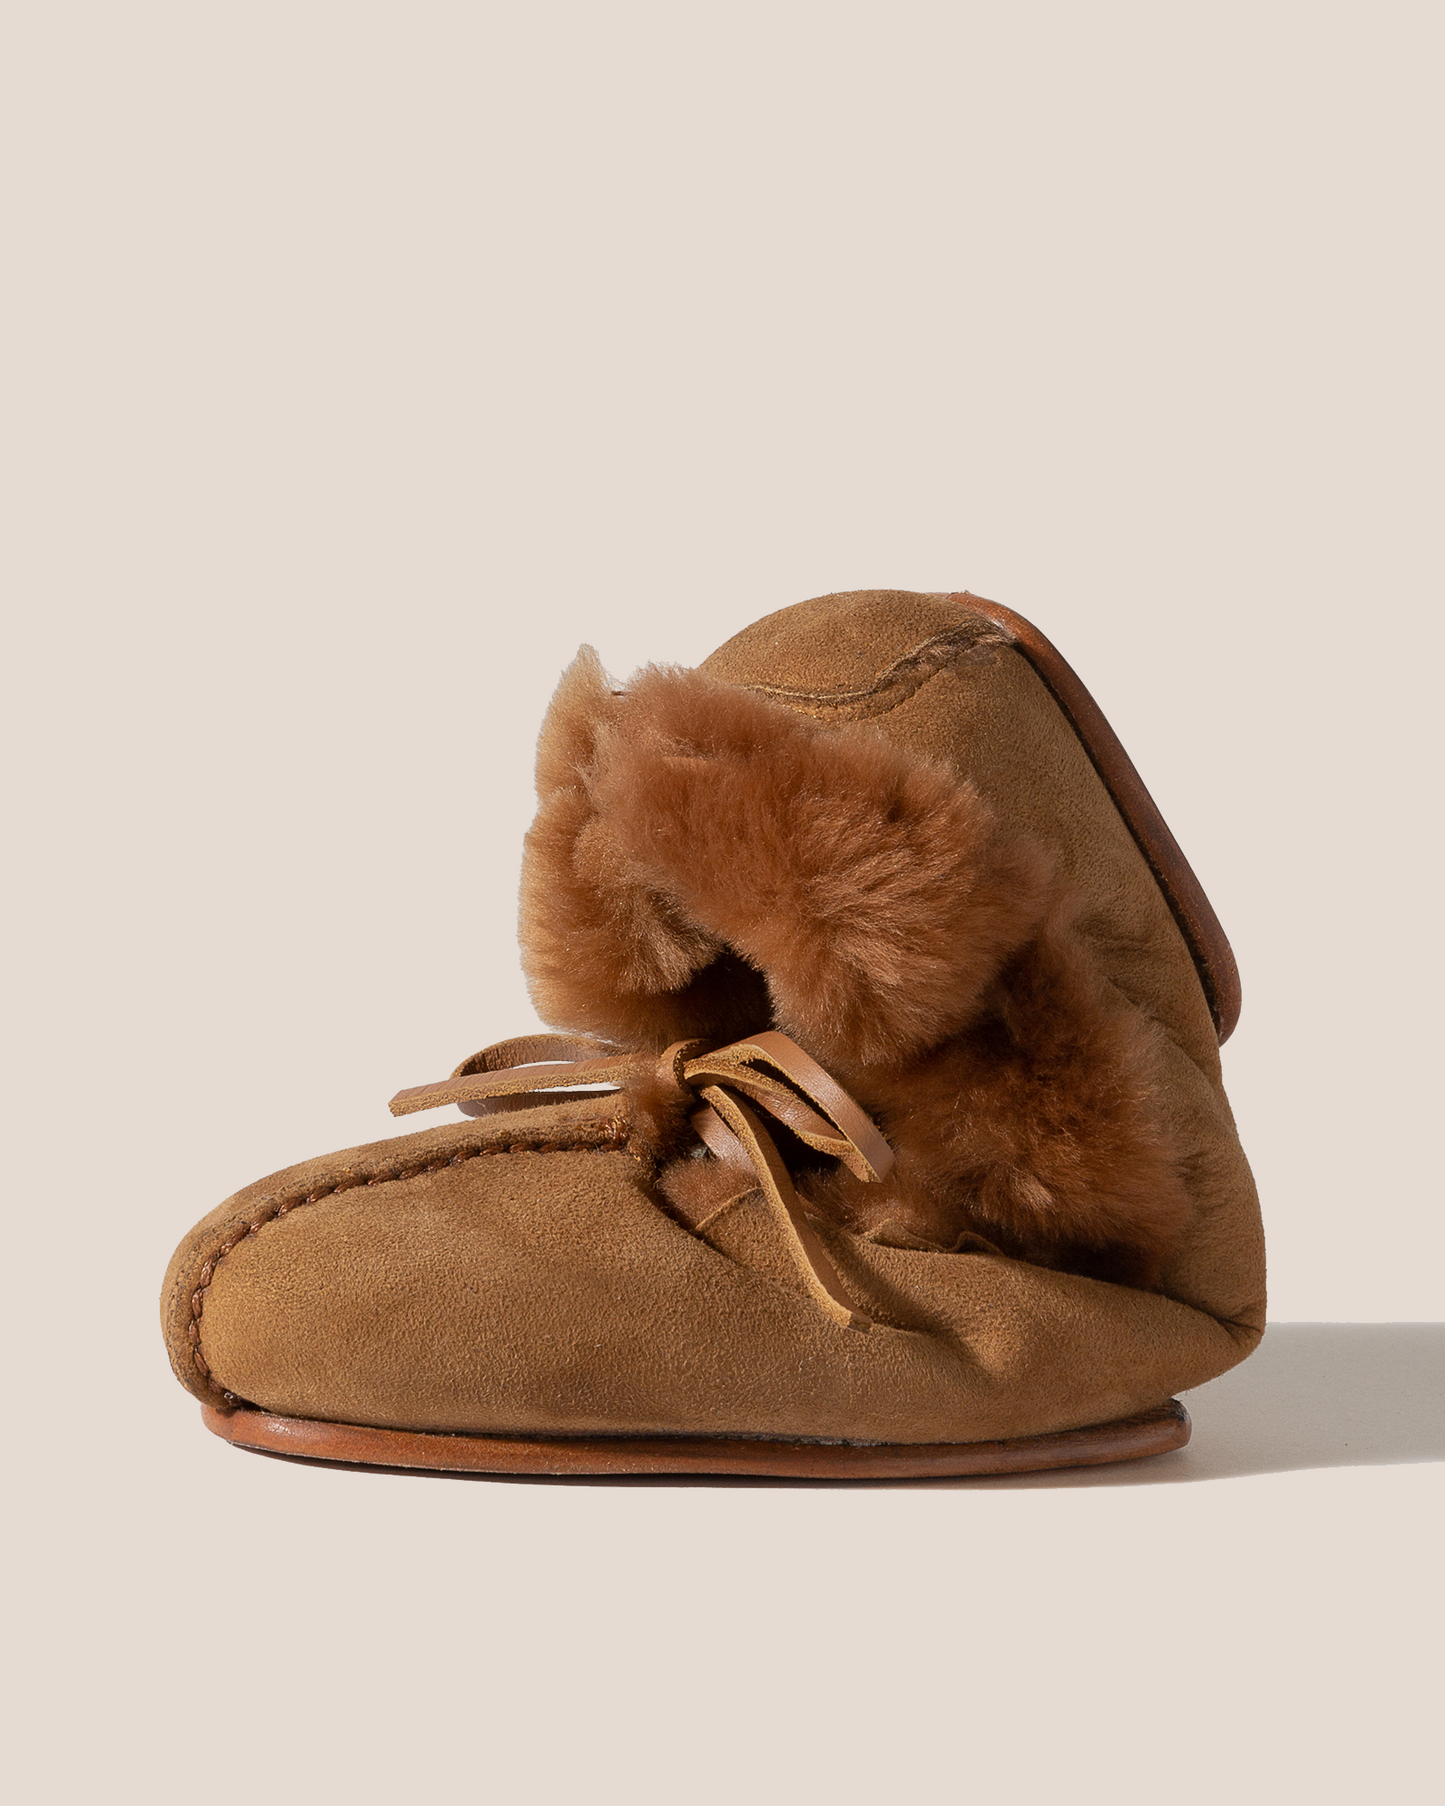 TILLA SHEARLING - Deconstructed Suede Babouche